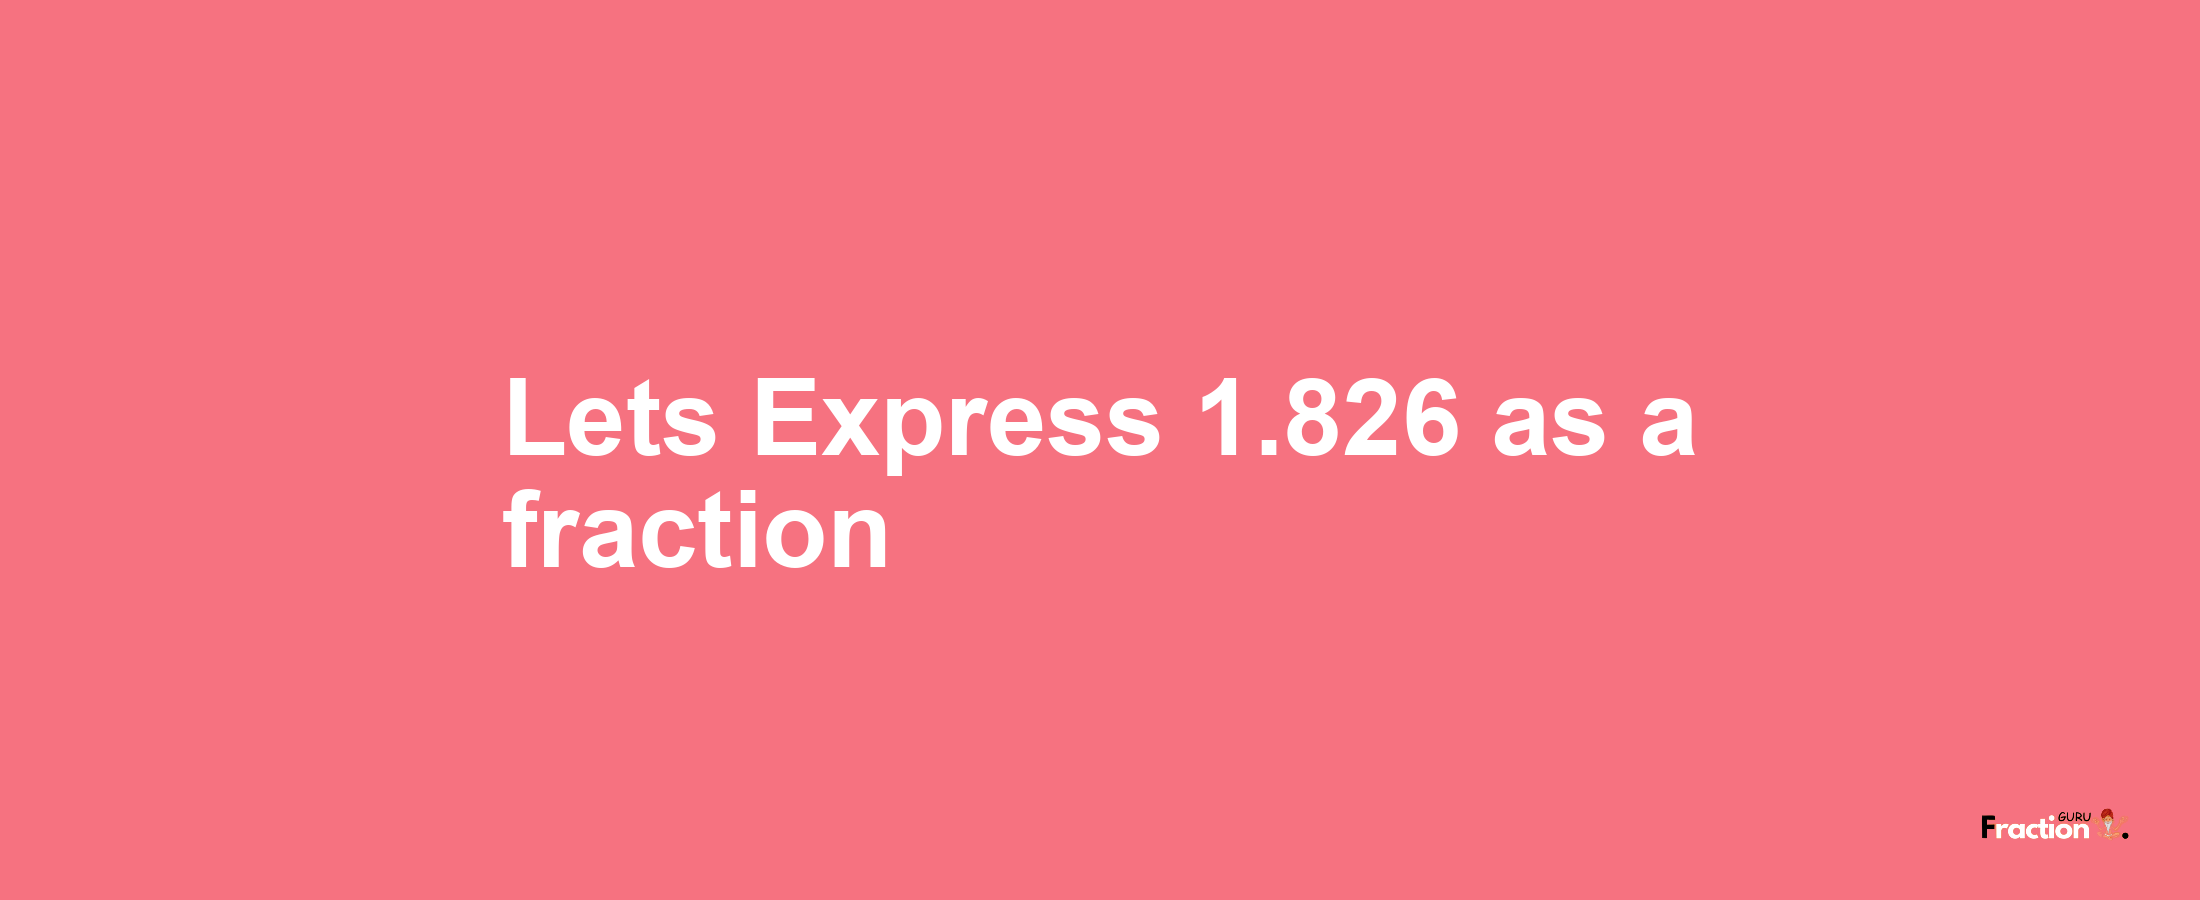 Lets Express 1.826 as afraction